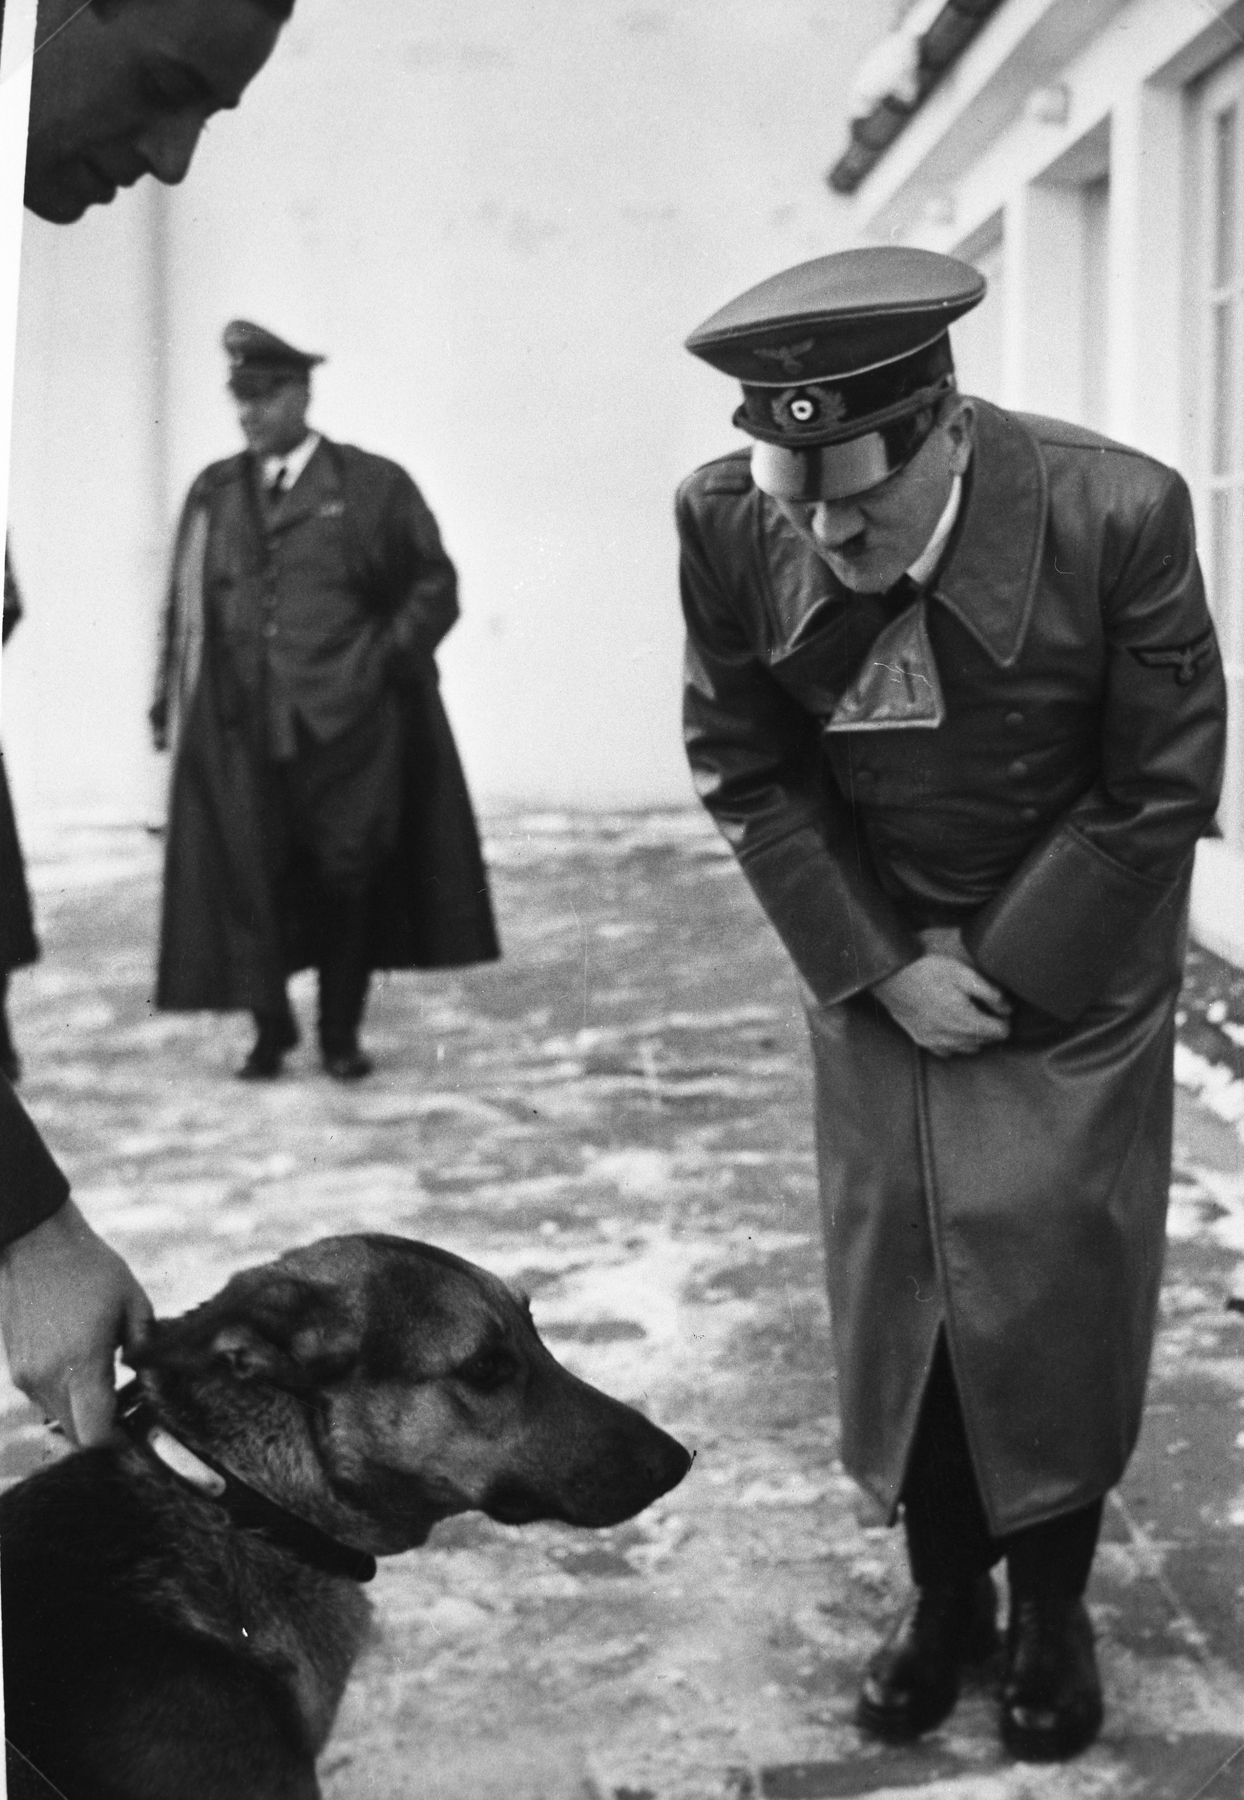 Adolf Hitler and his dog Wolf on the Berghof terrace early January 1940, from Eva Braun's albums